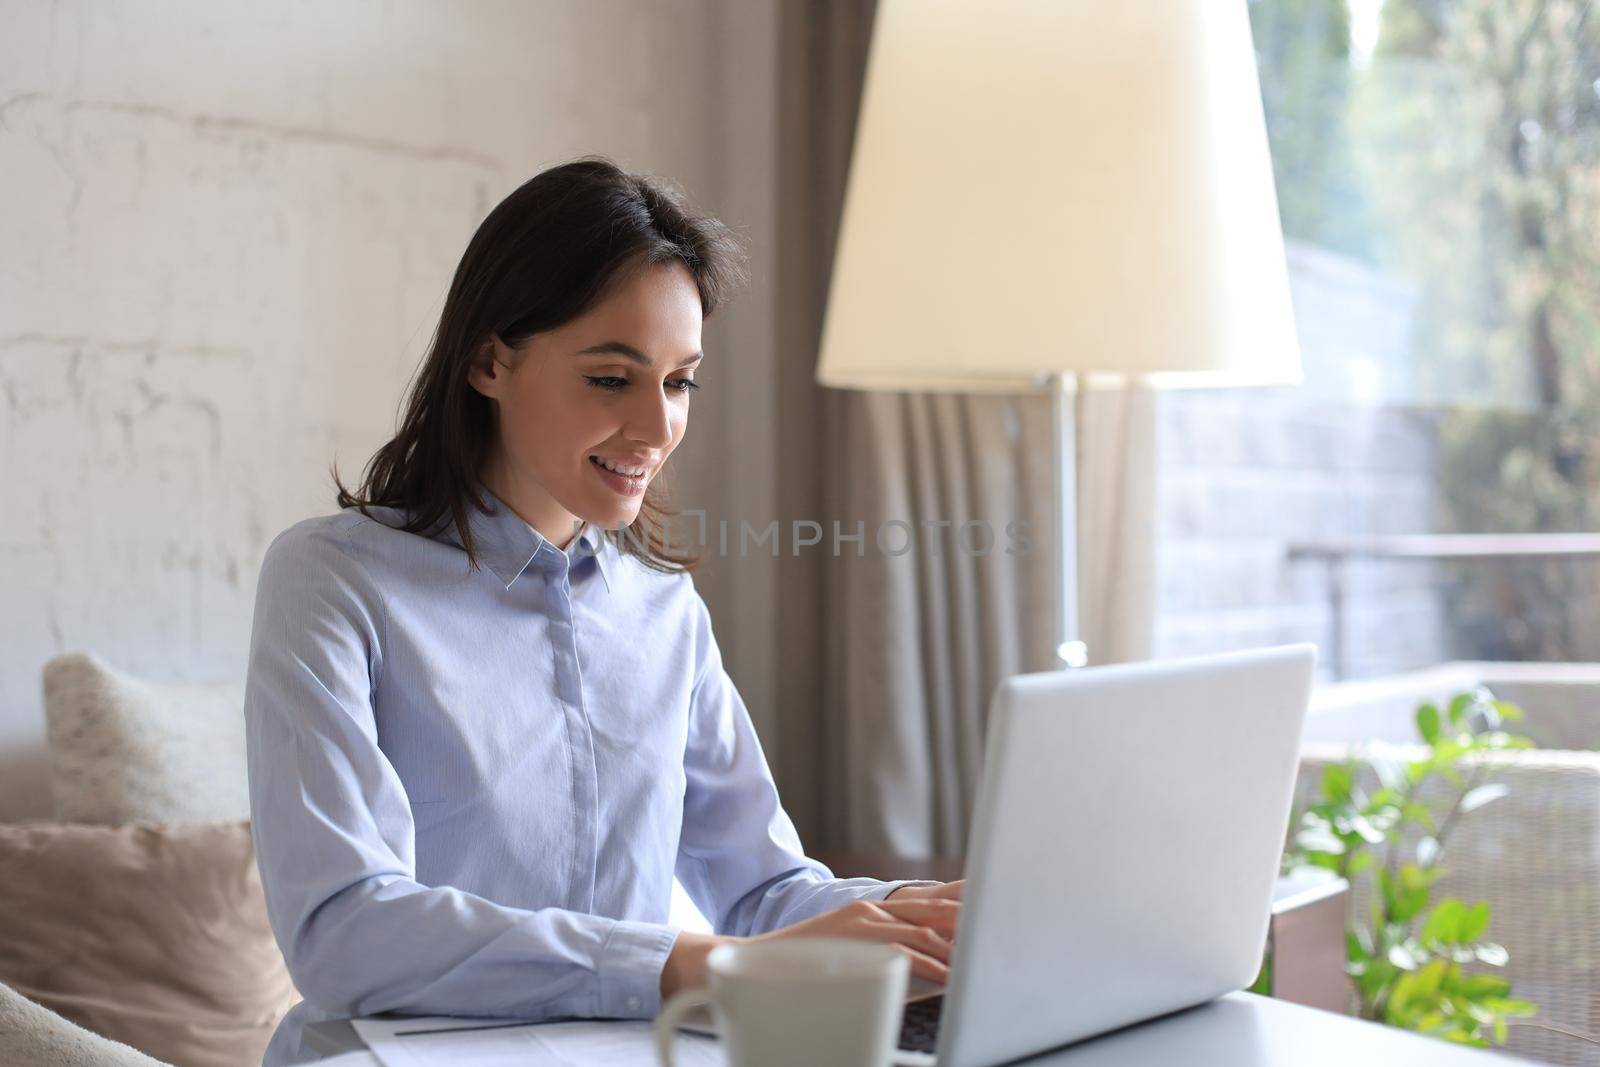 Smiling pretty woman sitting at table, looking at laptop screen. Happy entrepreneur reading message email with good news, chatting with clients online